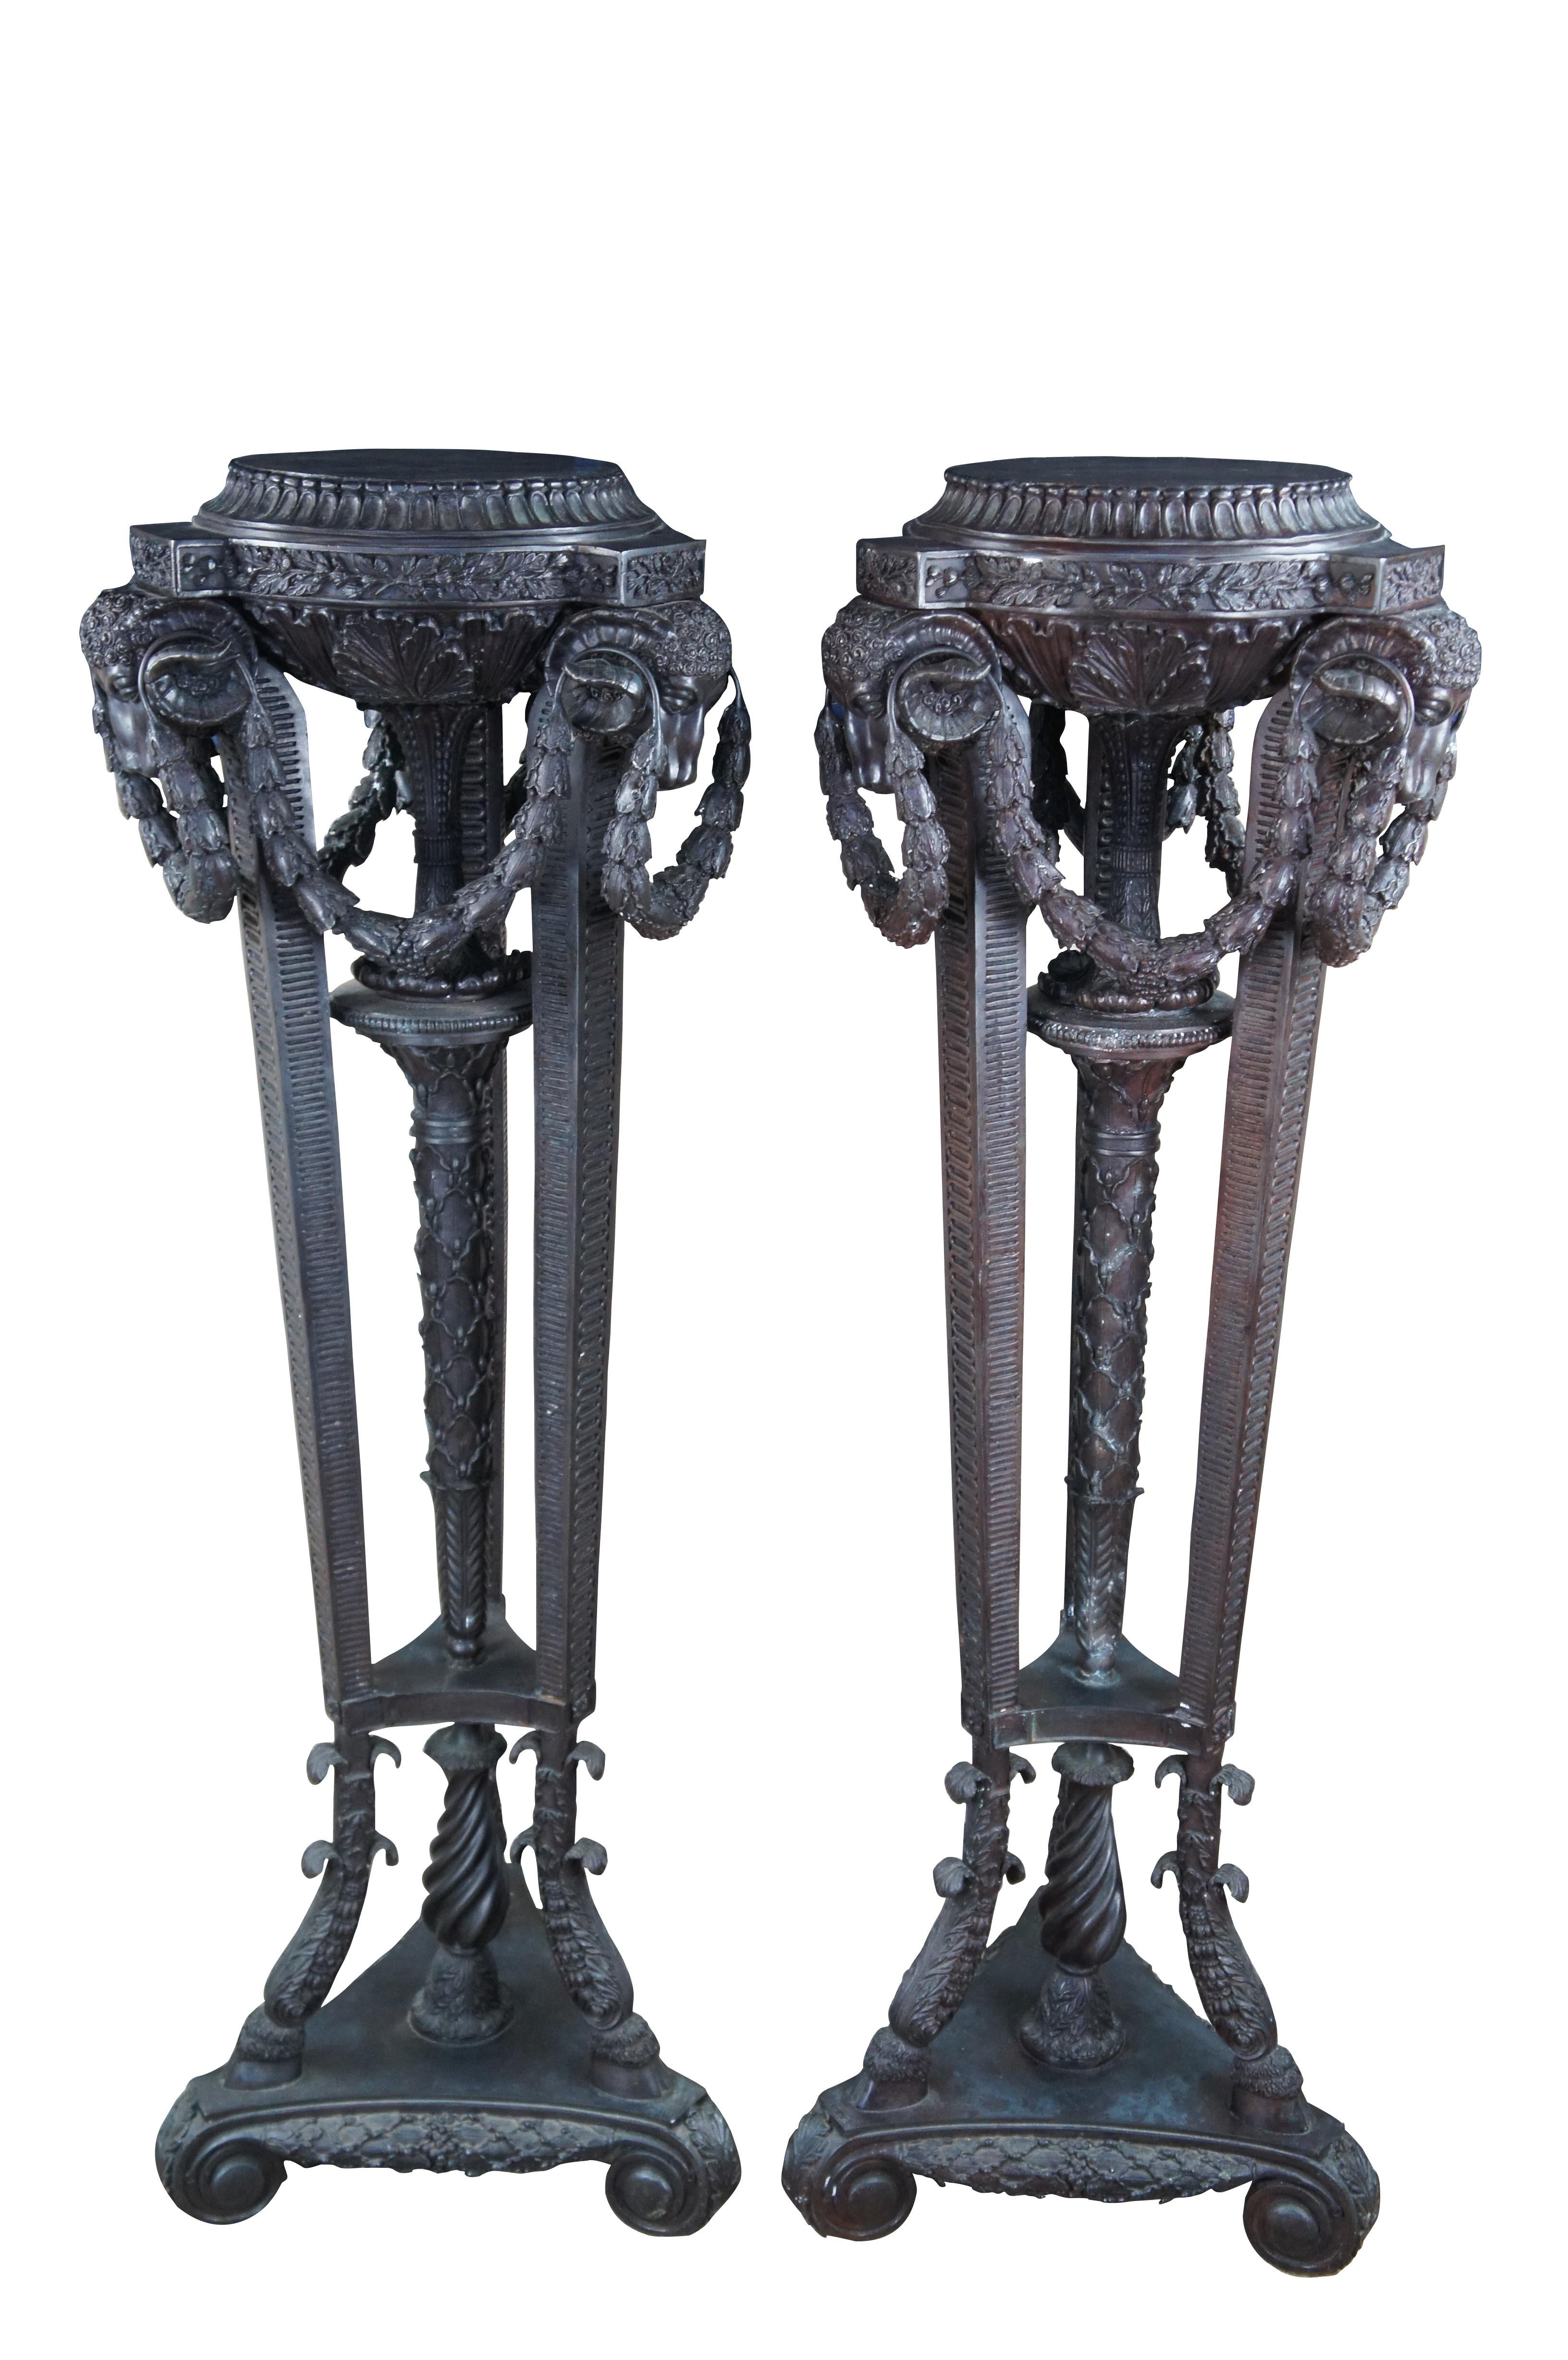 2 Metropolitan Galleries Neoclassical Bronze Rams Head Sculpture Pedestals Stand In Good Condition For Sale In Dayton, OH